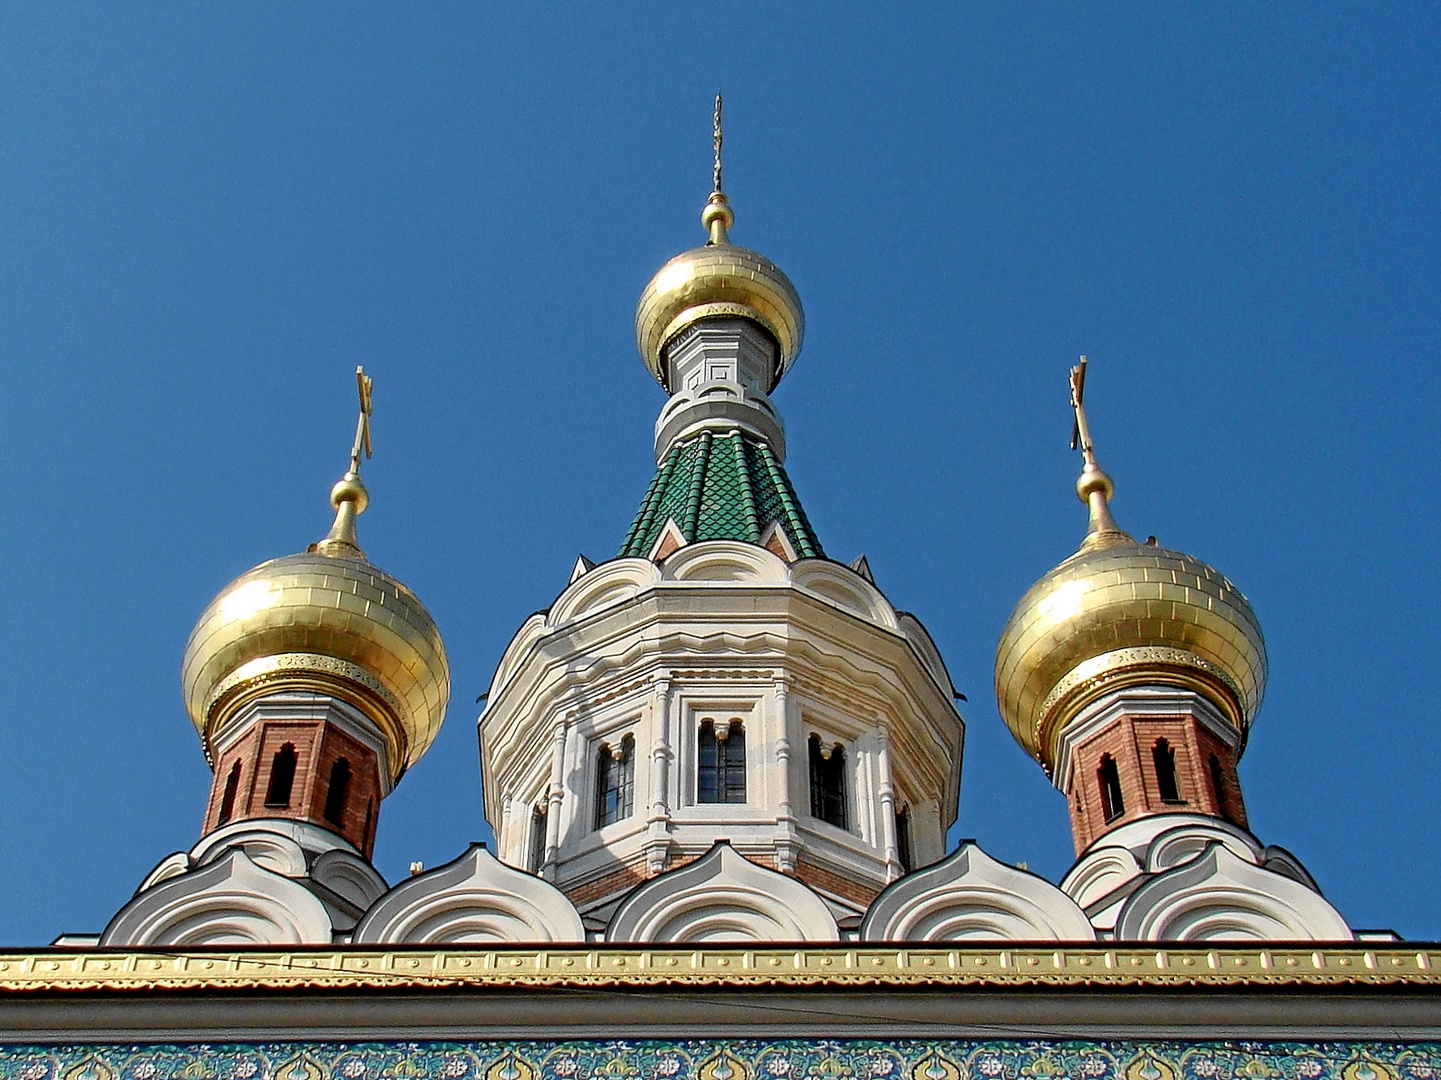 Russisch-Orthodoxe Kathedrale 